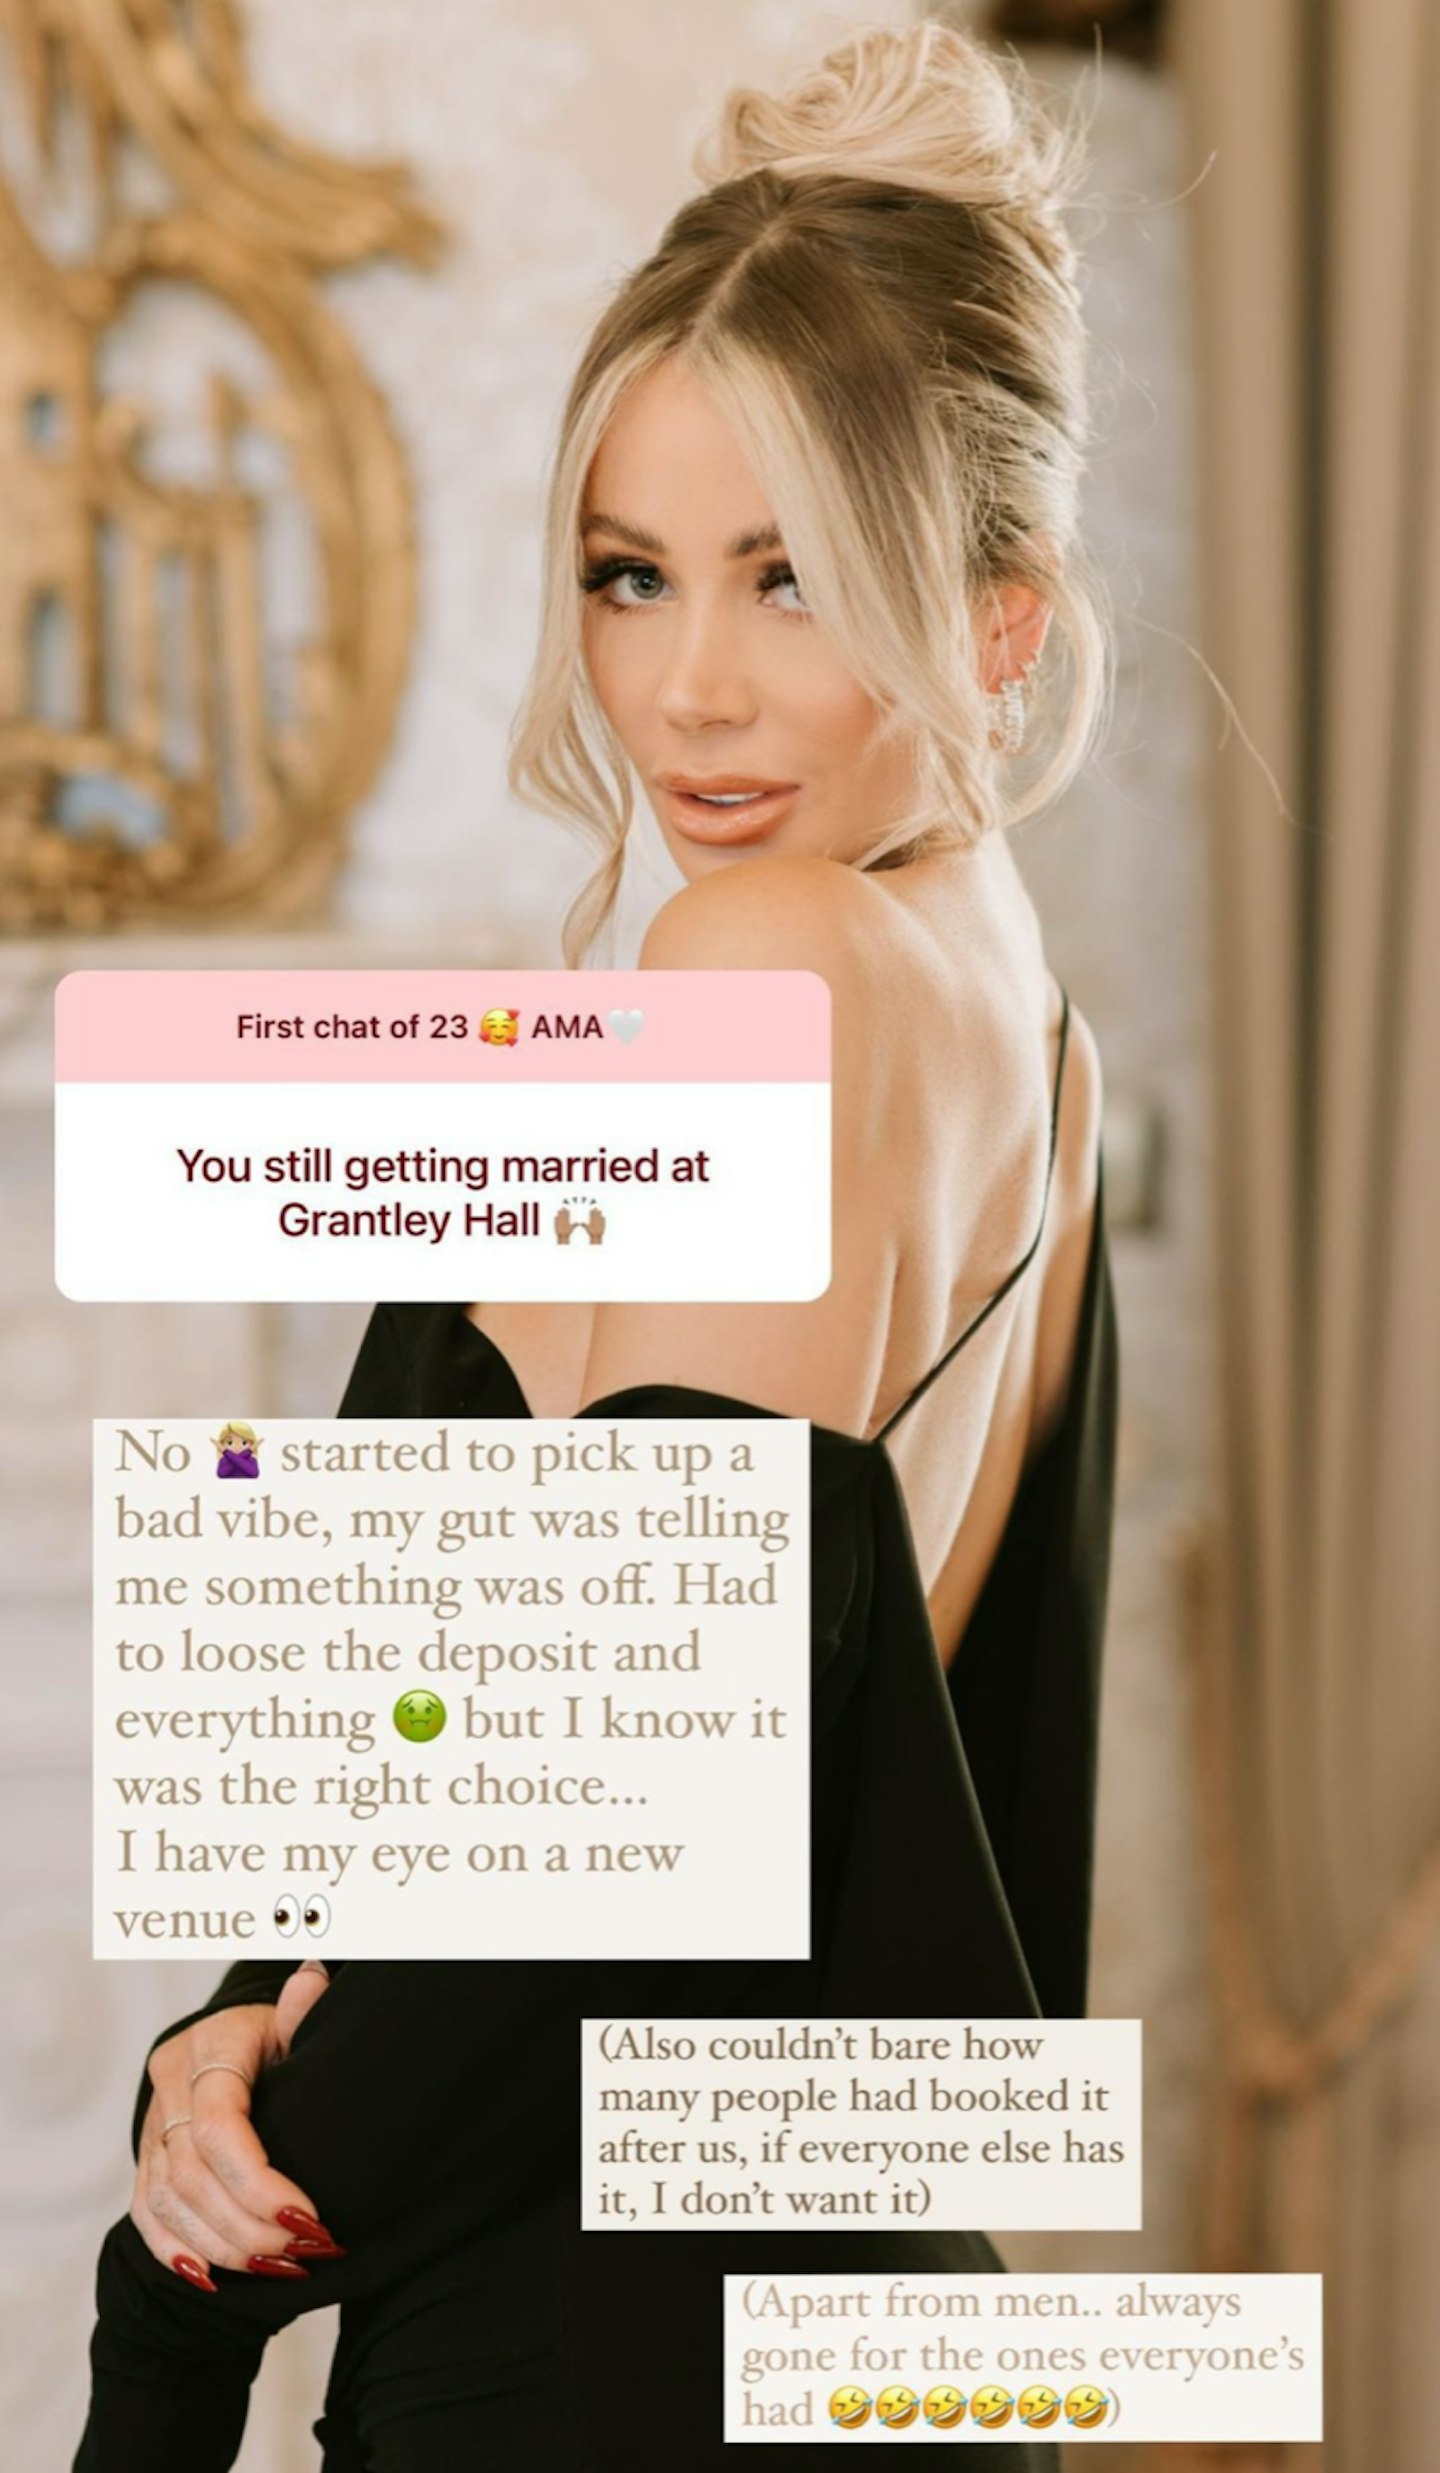 Olivia Attwood's Instagram story explaining why she cancelled her wedding at Grantley Hall